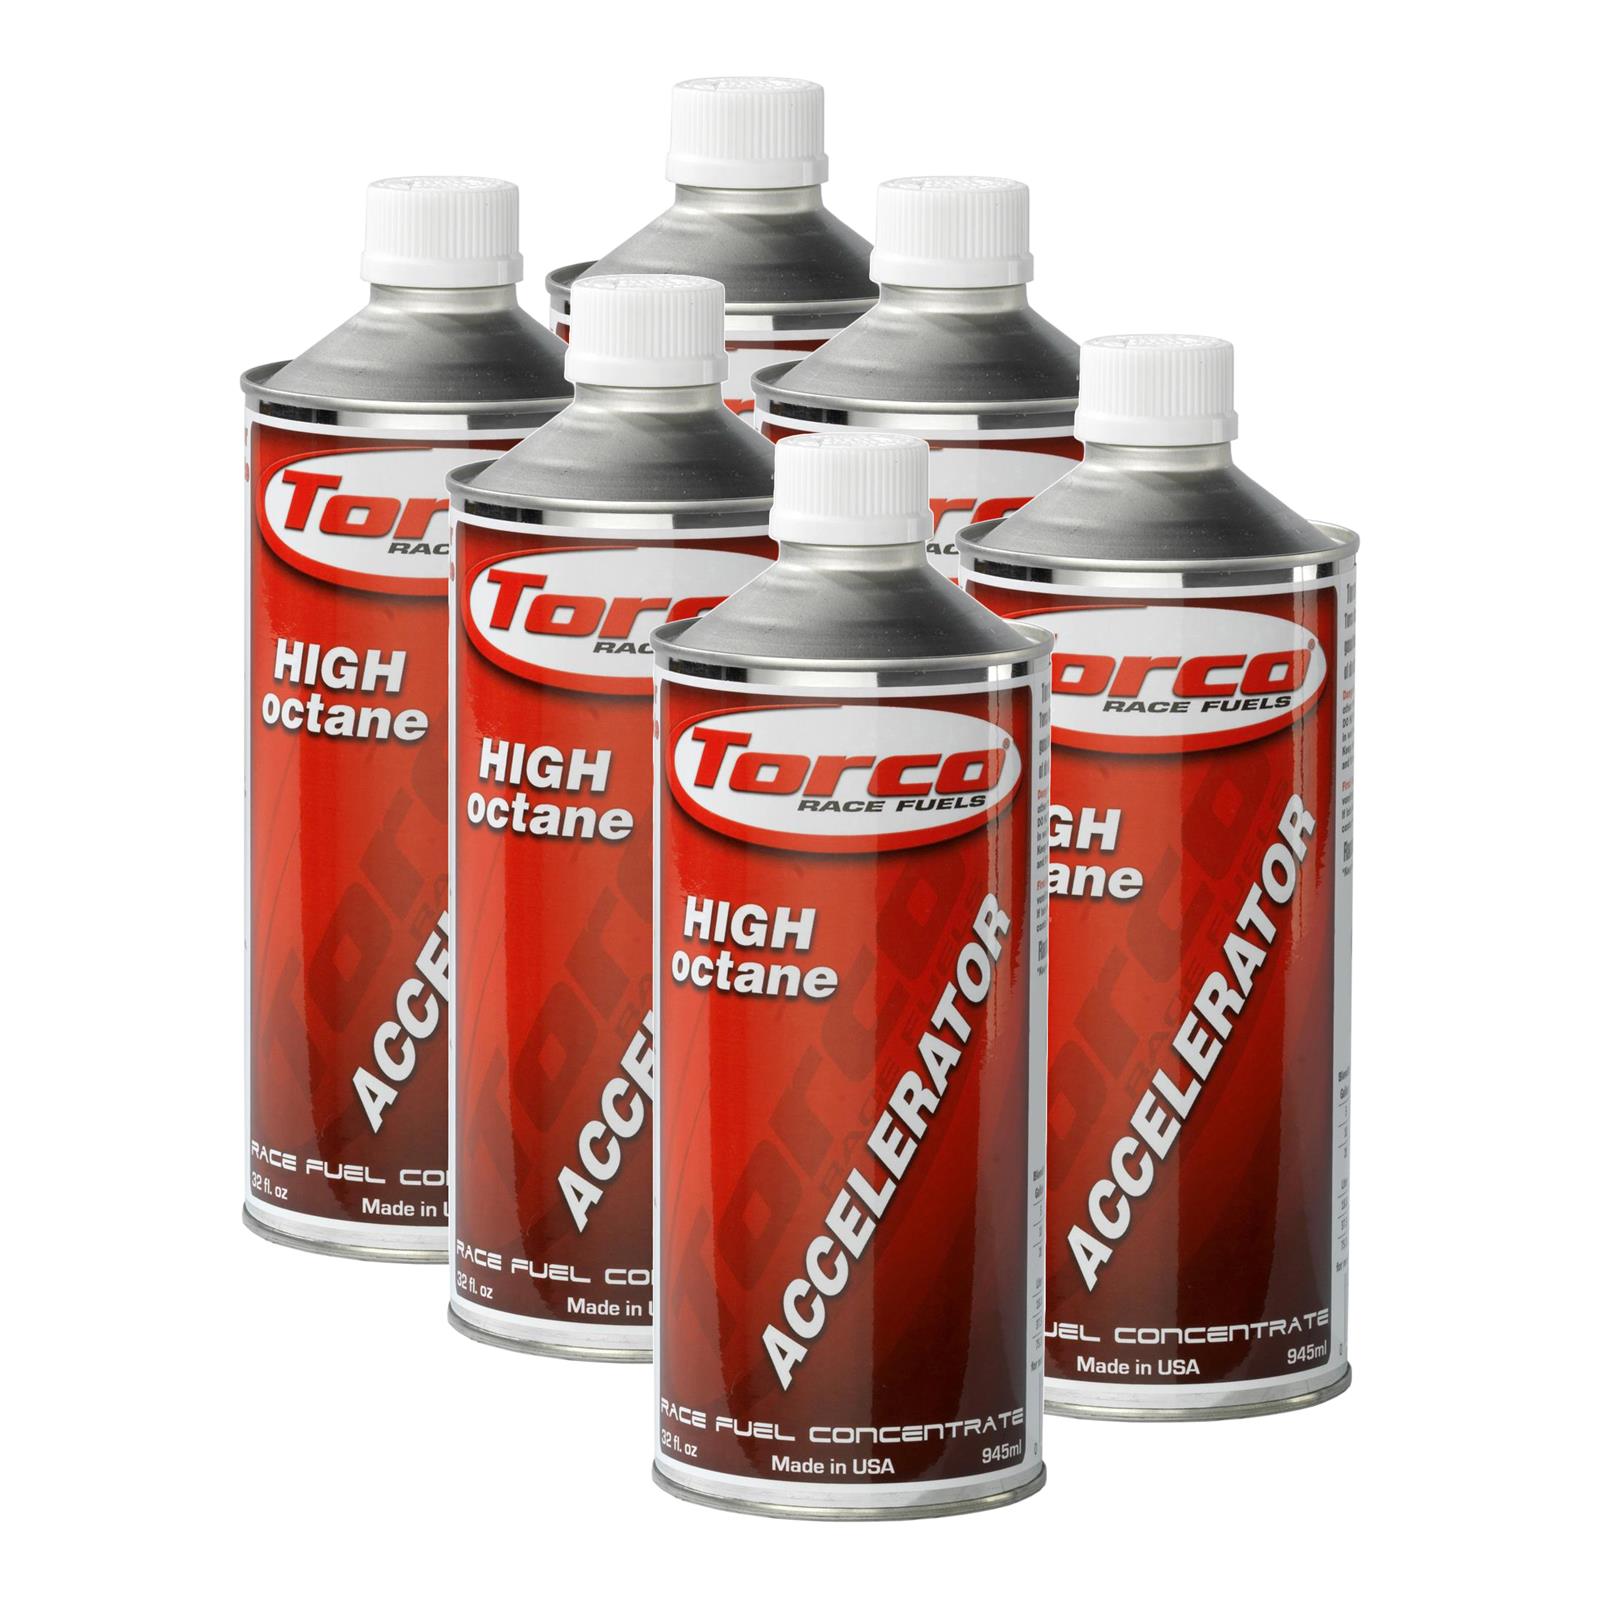 Torco Accelerator, Unleaded Race Fuel Concentrate, Case of 6 x 32oz